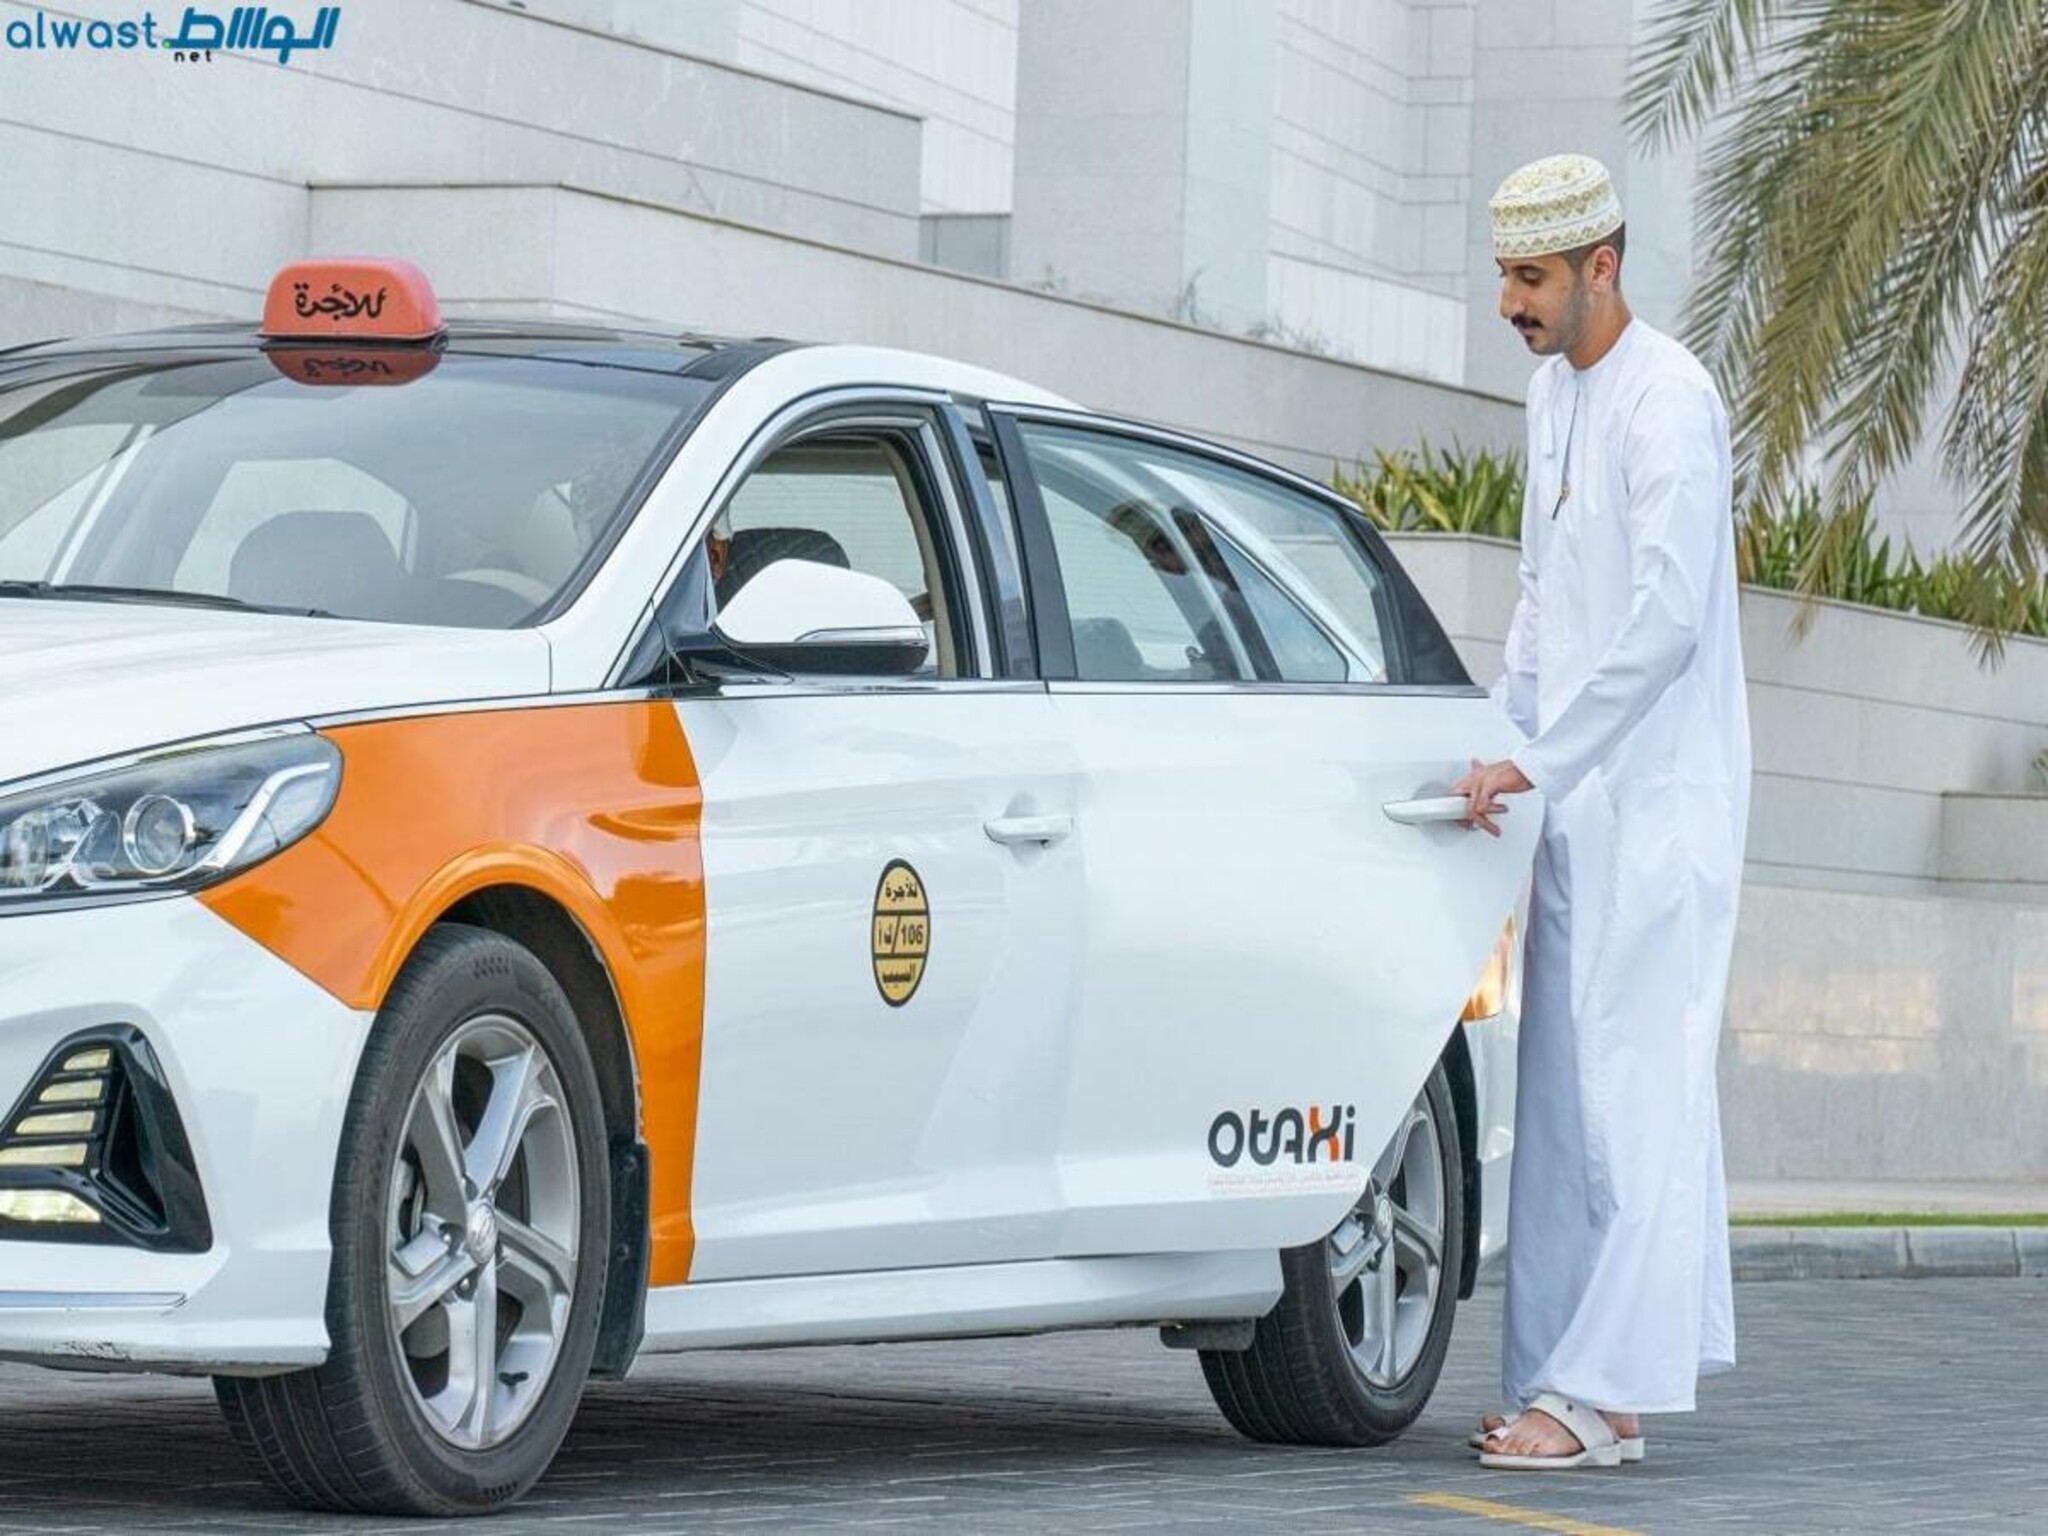 Oman officially announced the issuance of two new taxi licenses